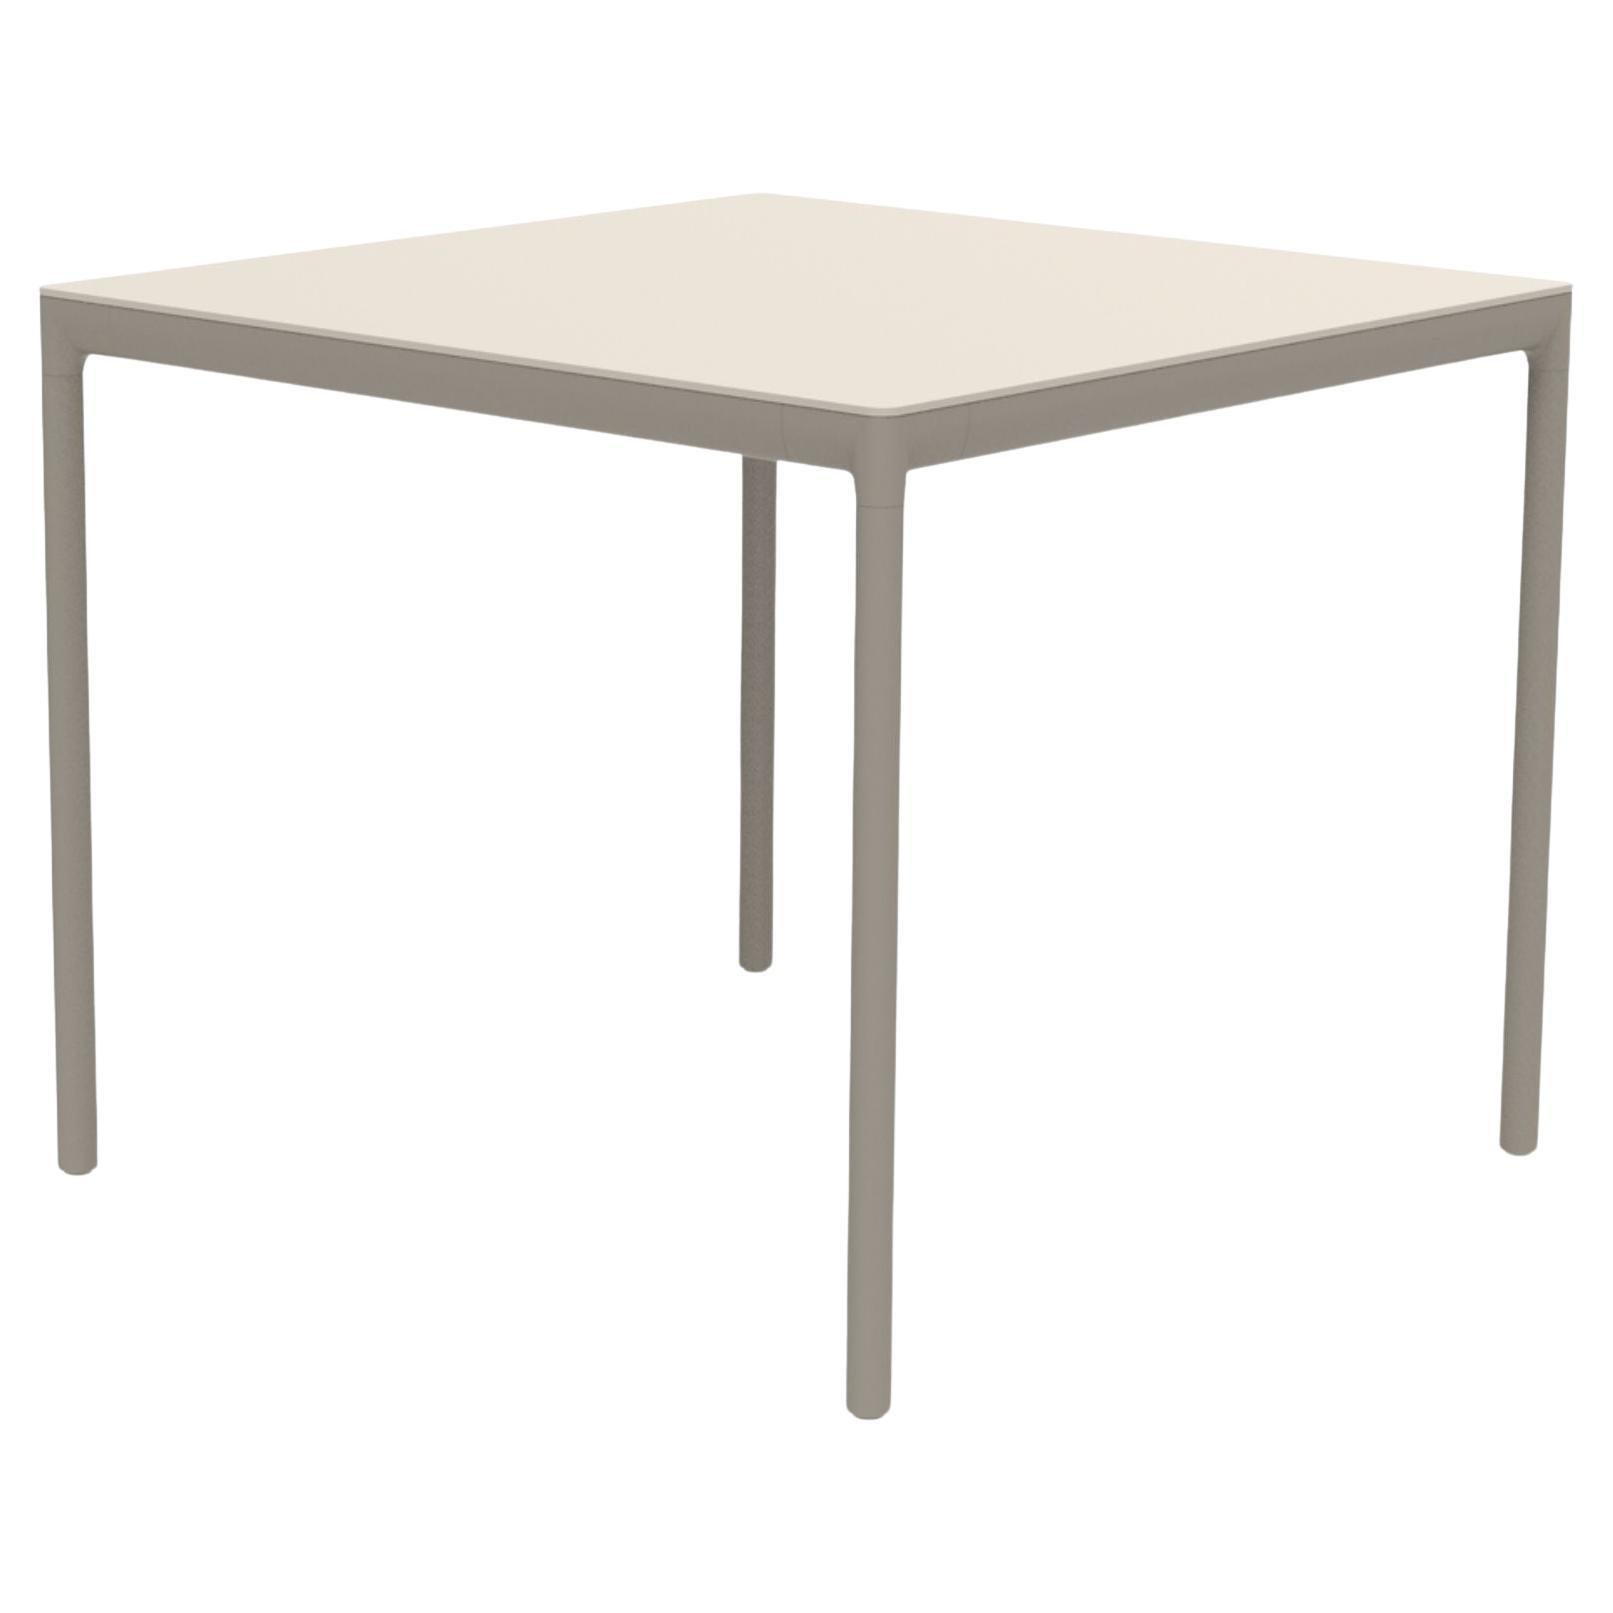 Ribbons Cream 90 Table by Mowee For Sale